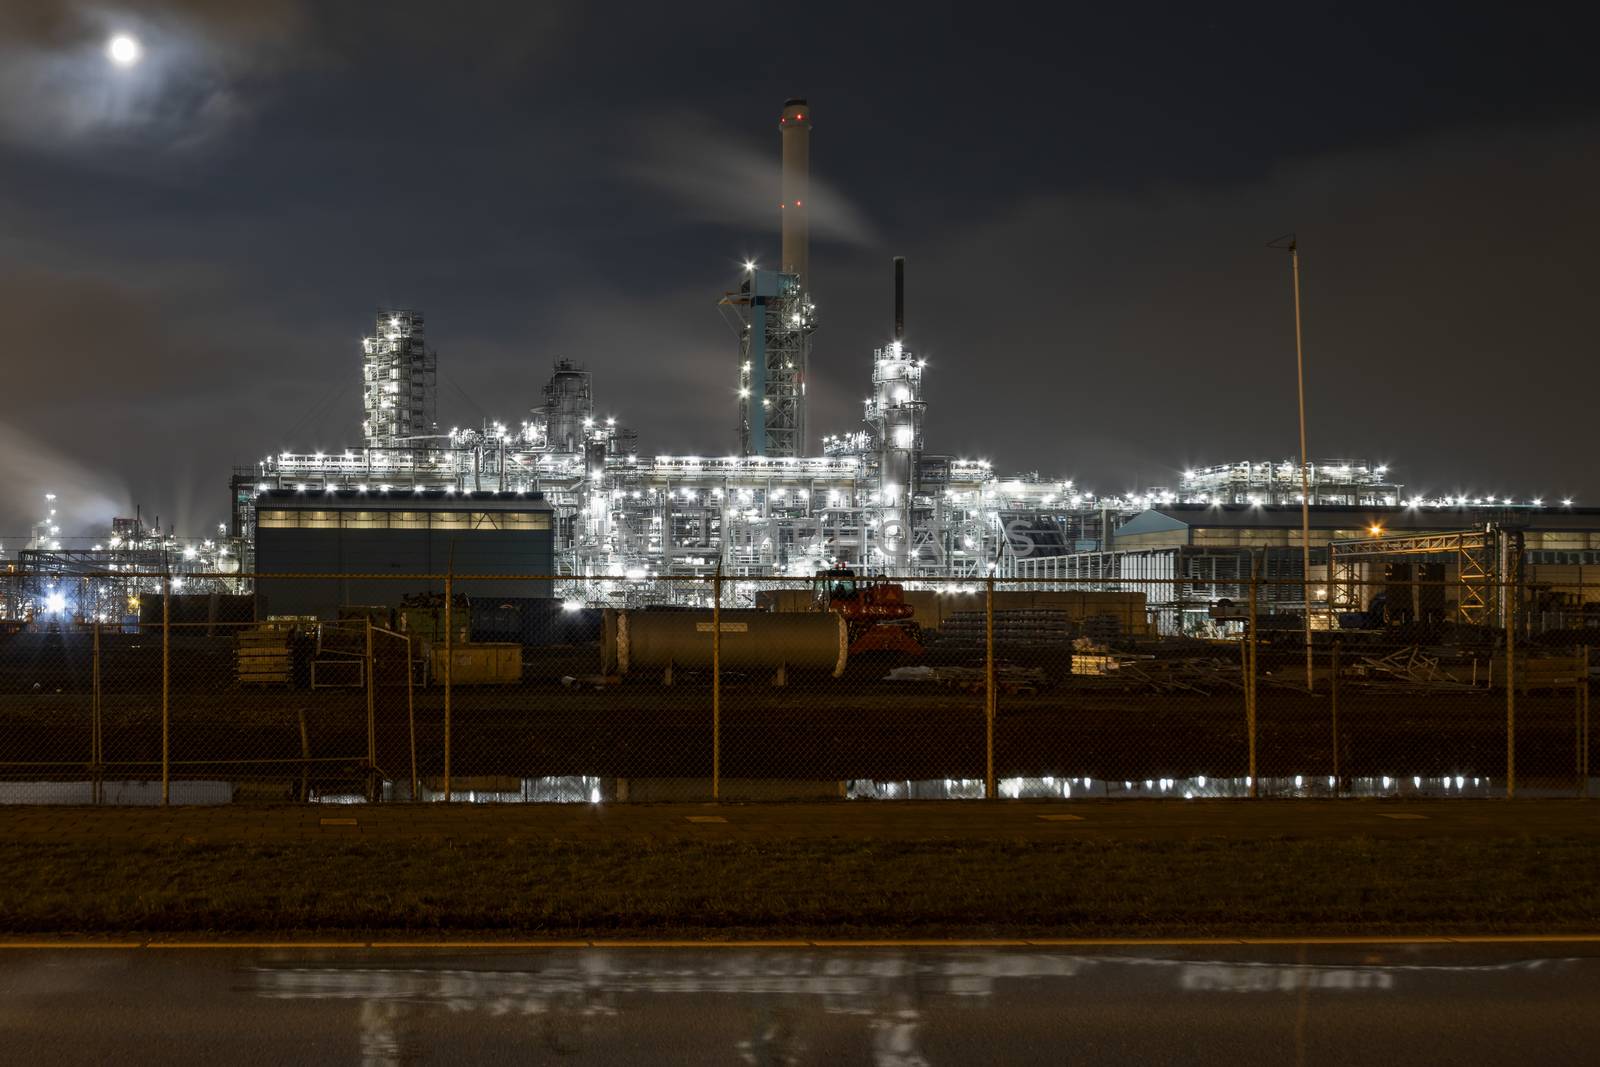 Night view of an industrial zone with the rail road transporting in and out raw material by ankorlight